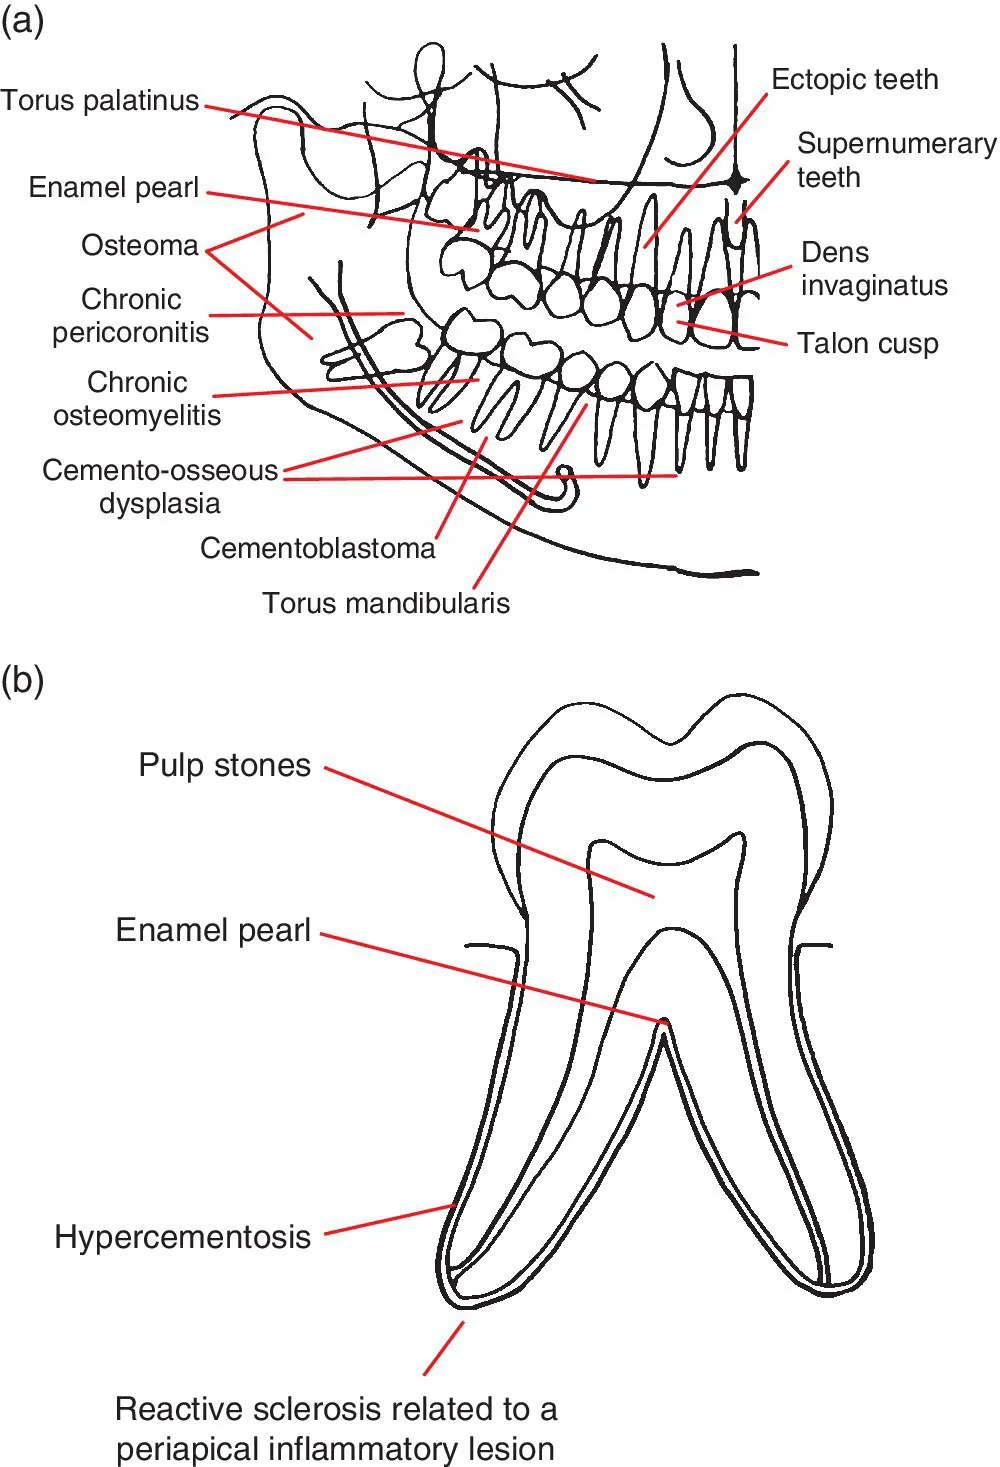 Line drawing of right upper and lower jaws and teeth (top) and a fully erupted tooth (bottom), with conditions having predilection for certain jaw and tooth regions illustrated.